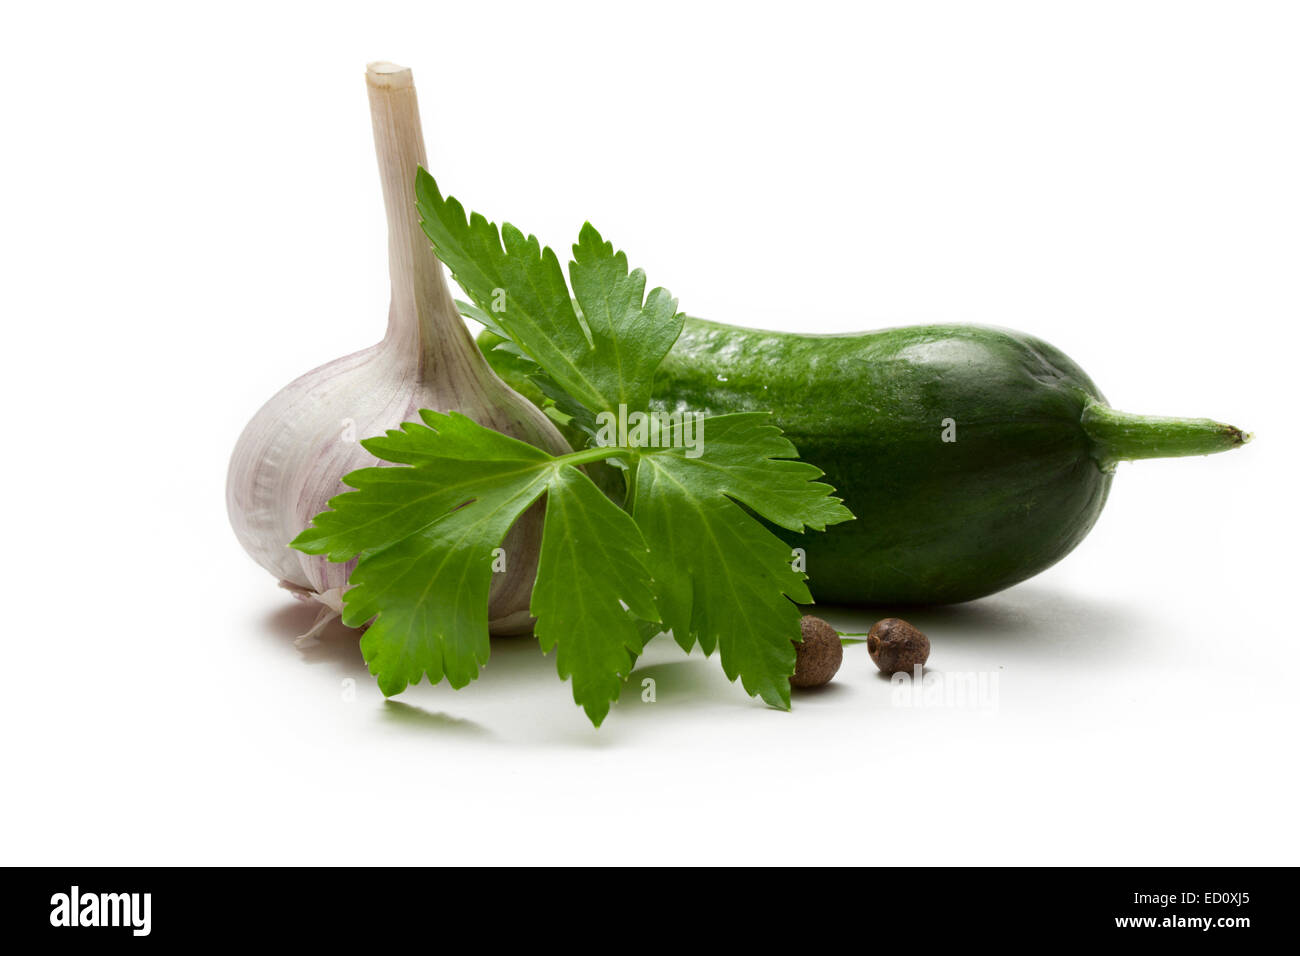 Garlic, parsley, cucumber and pepper isolated on the white background Stock Photo